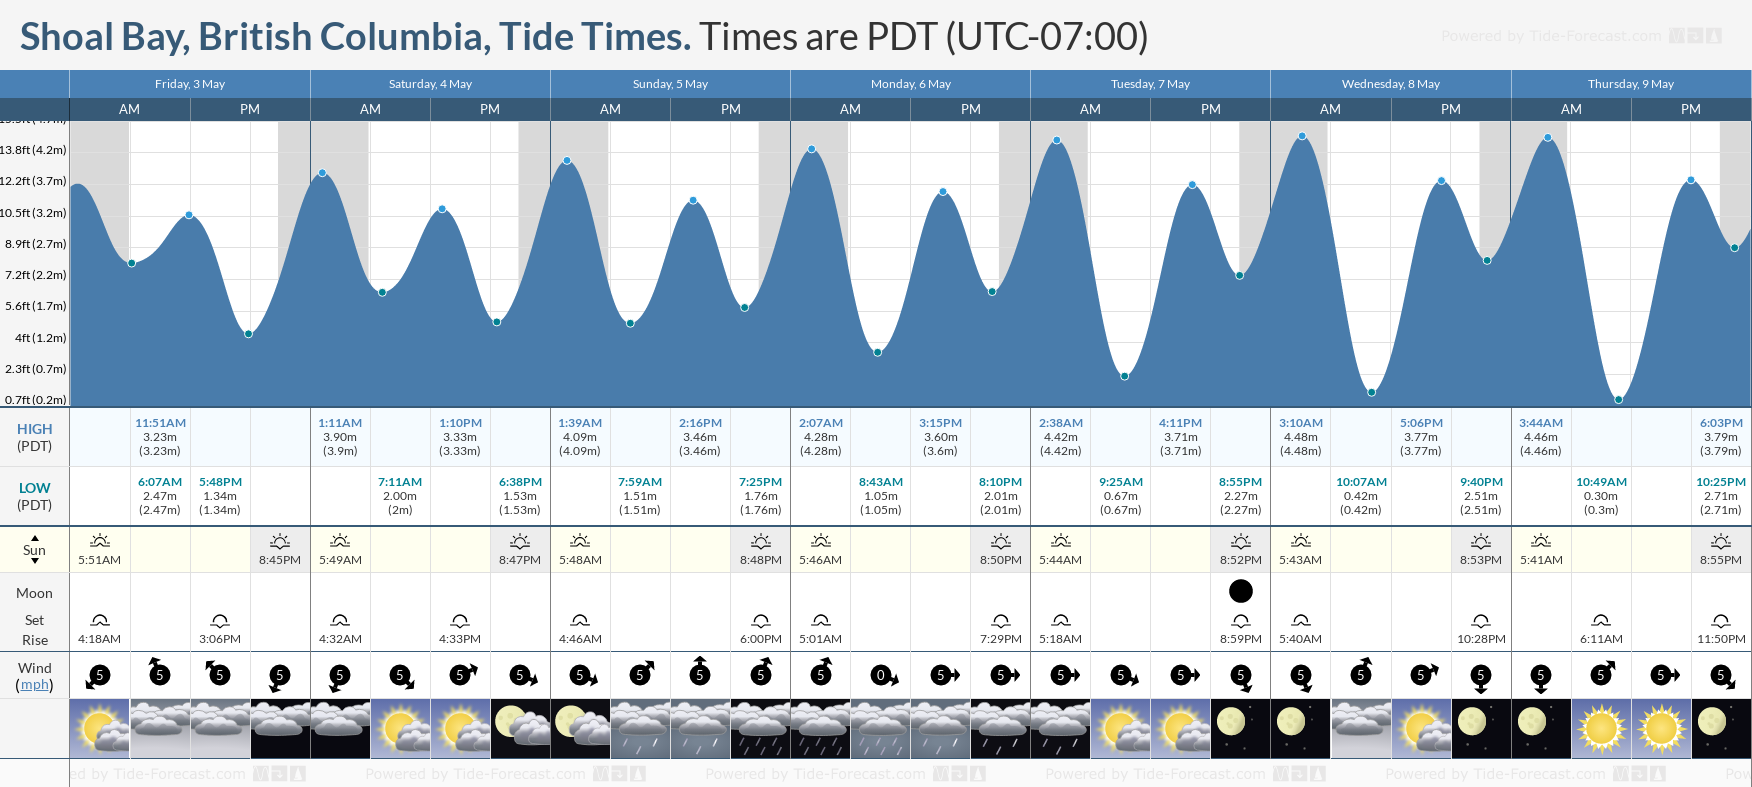 Shoal Bay, British Columbia Tide Chart including high and low tide tide times for the next 7 days